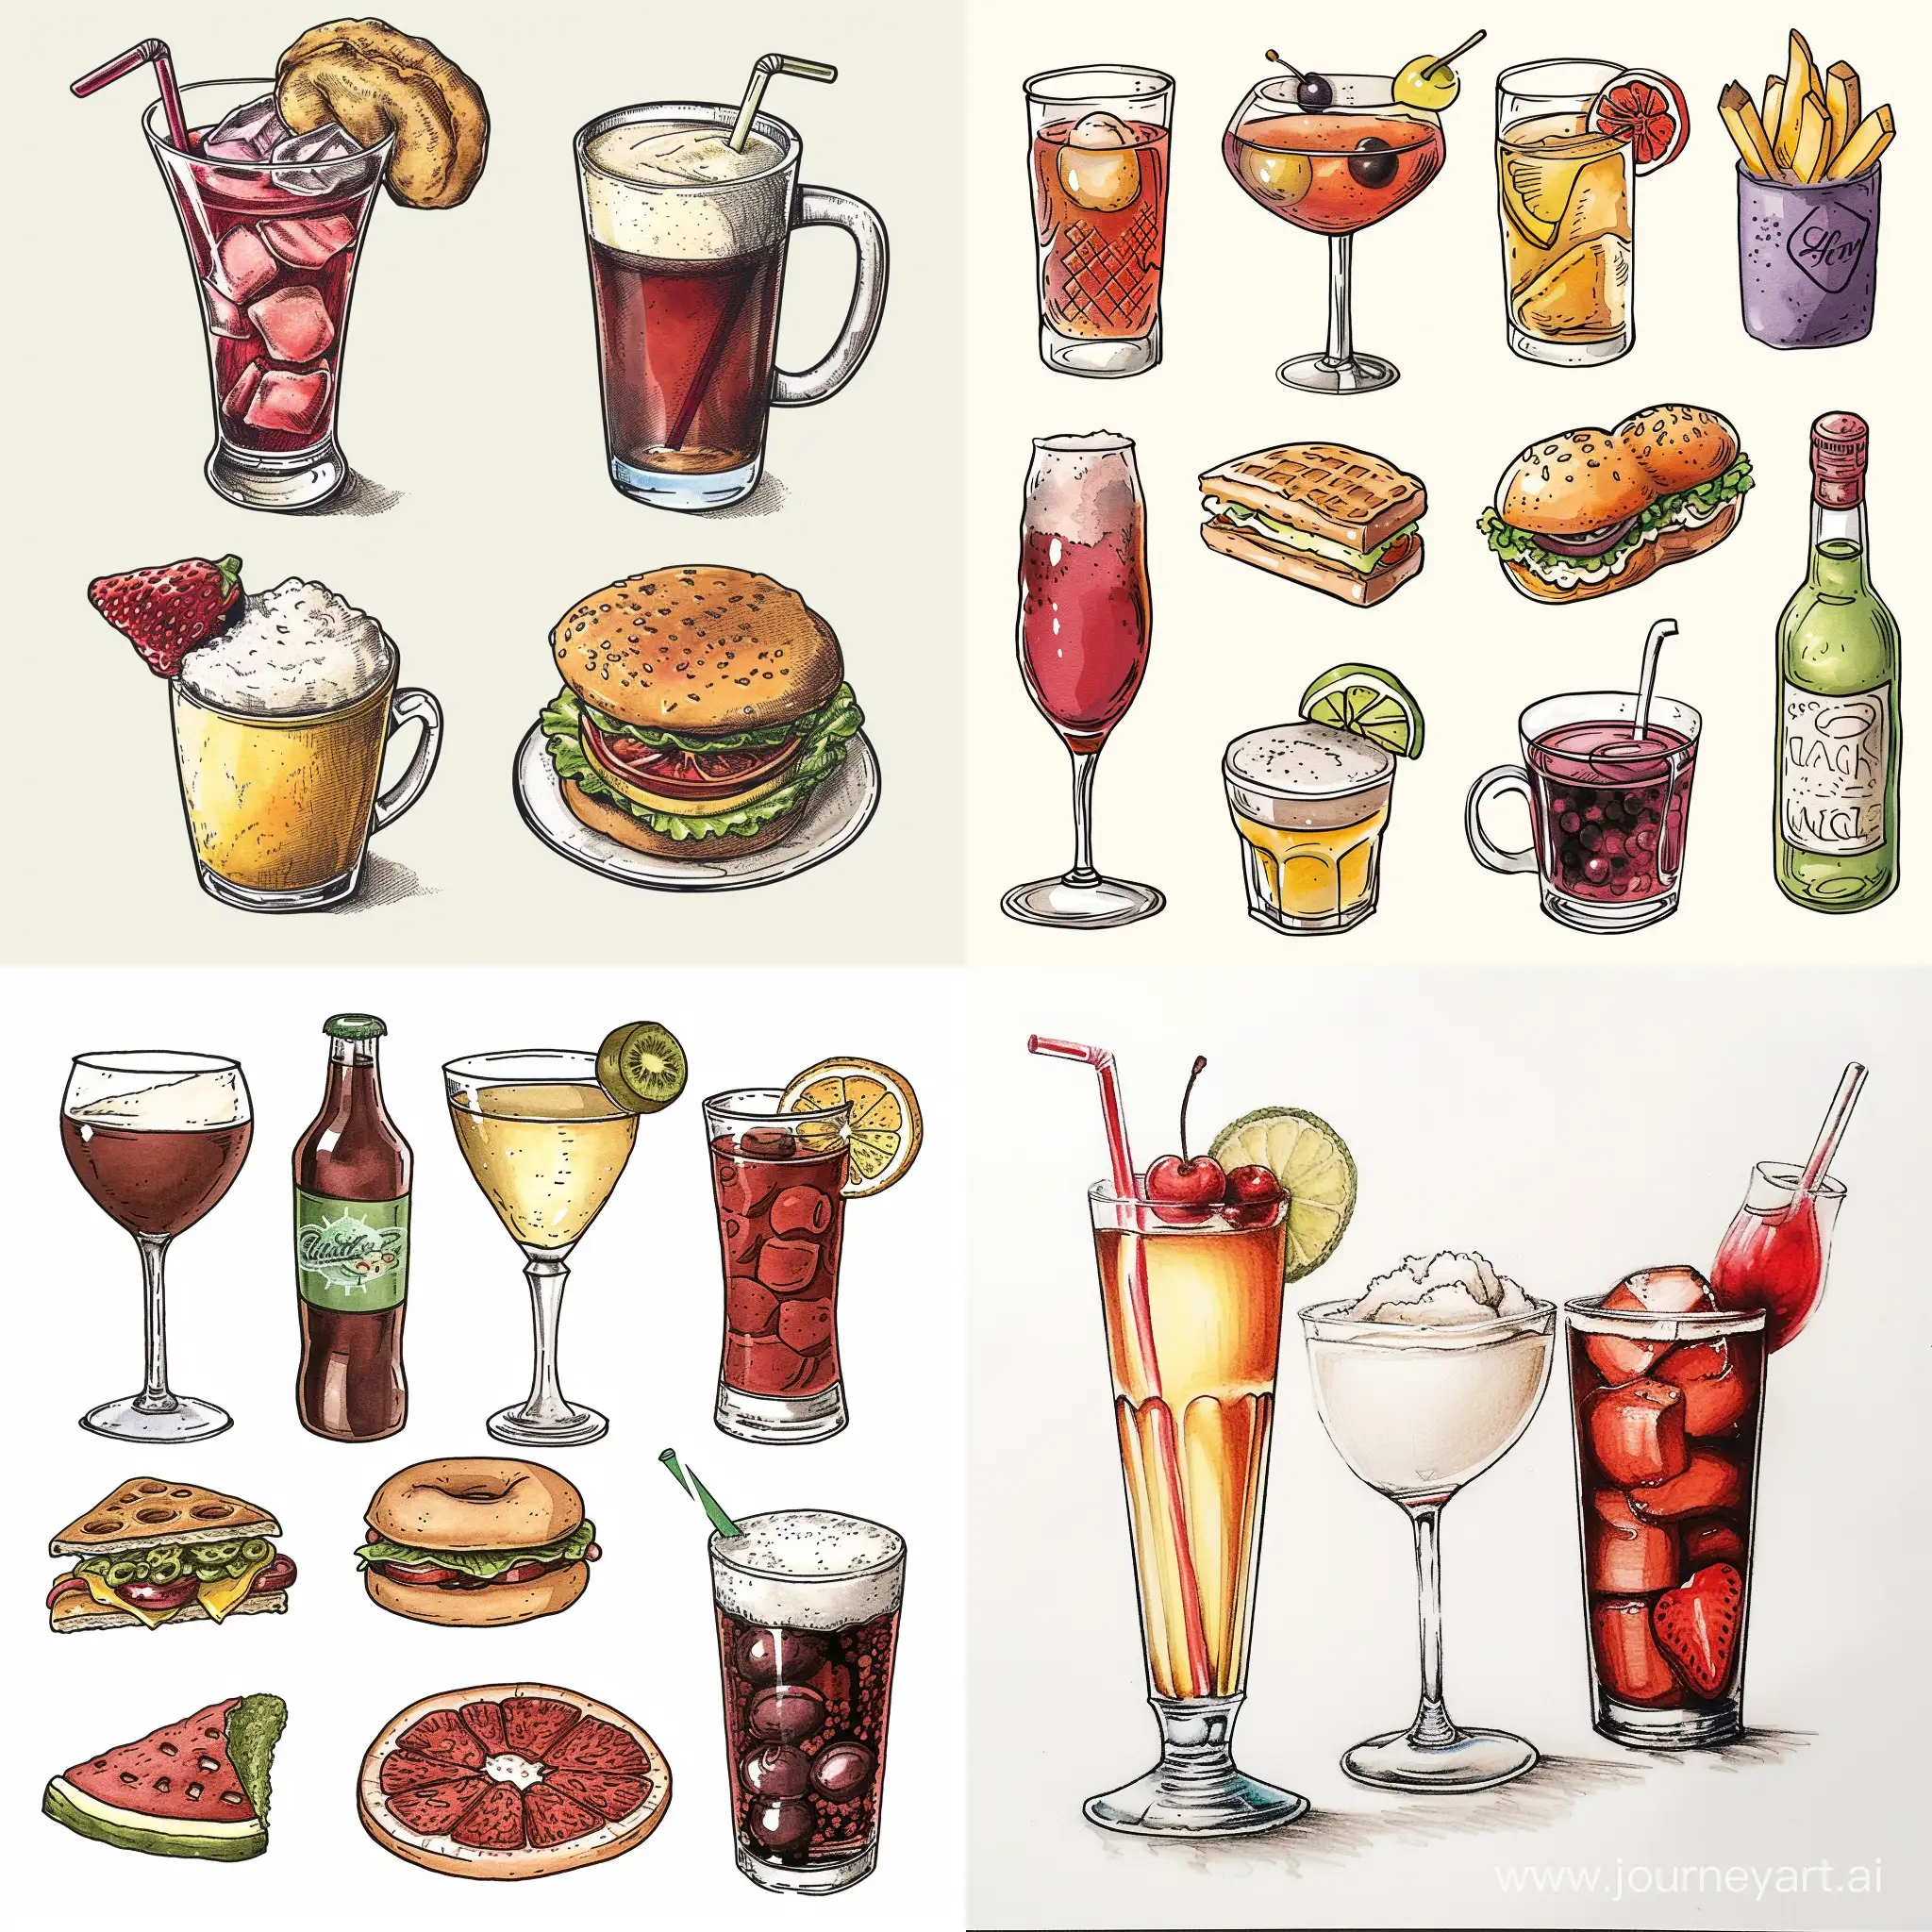 Vibrant-Food-and-Beverages-Collage